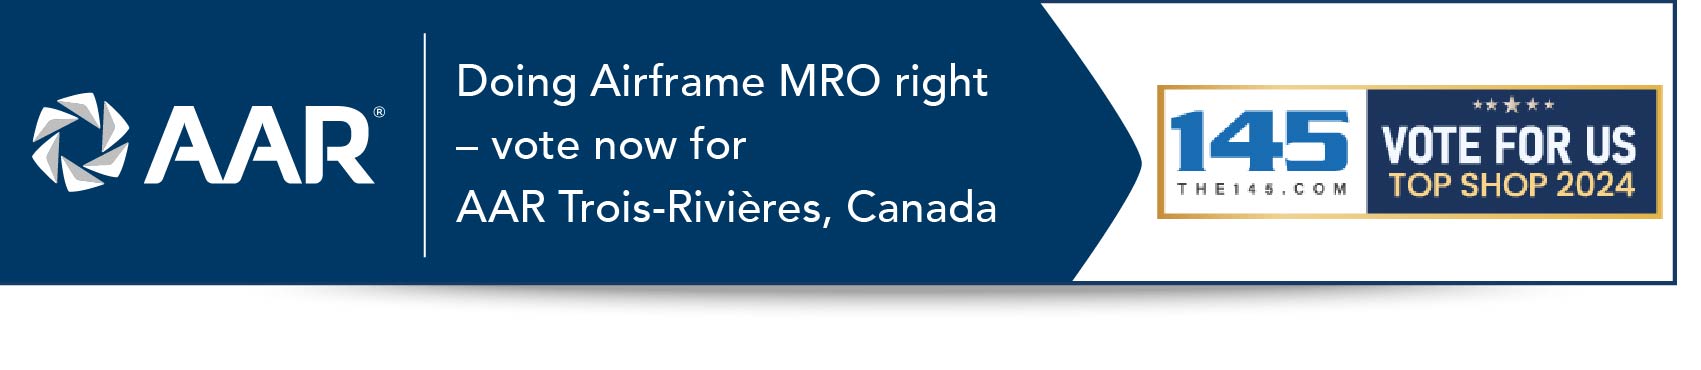 Vote for MRO Services - Trois-Rivieres as Your Top Shop